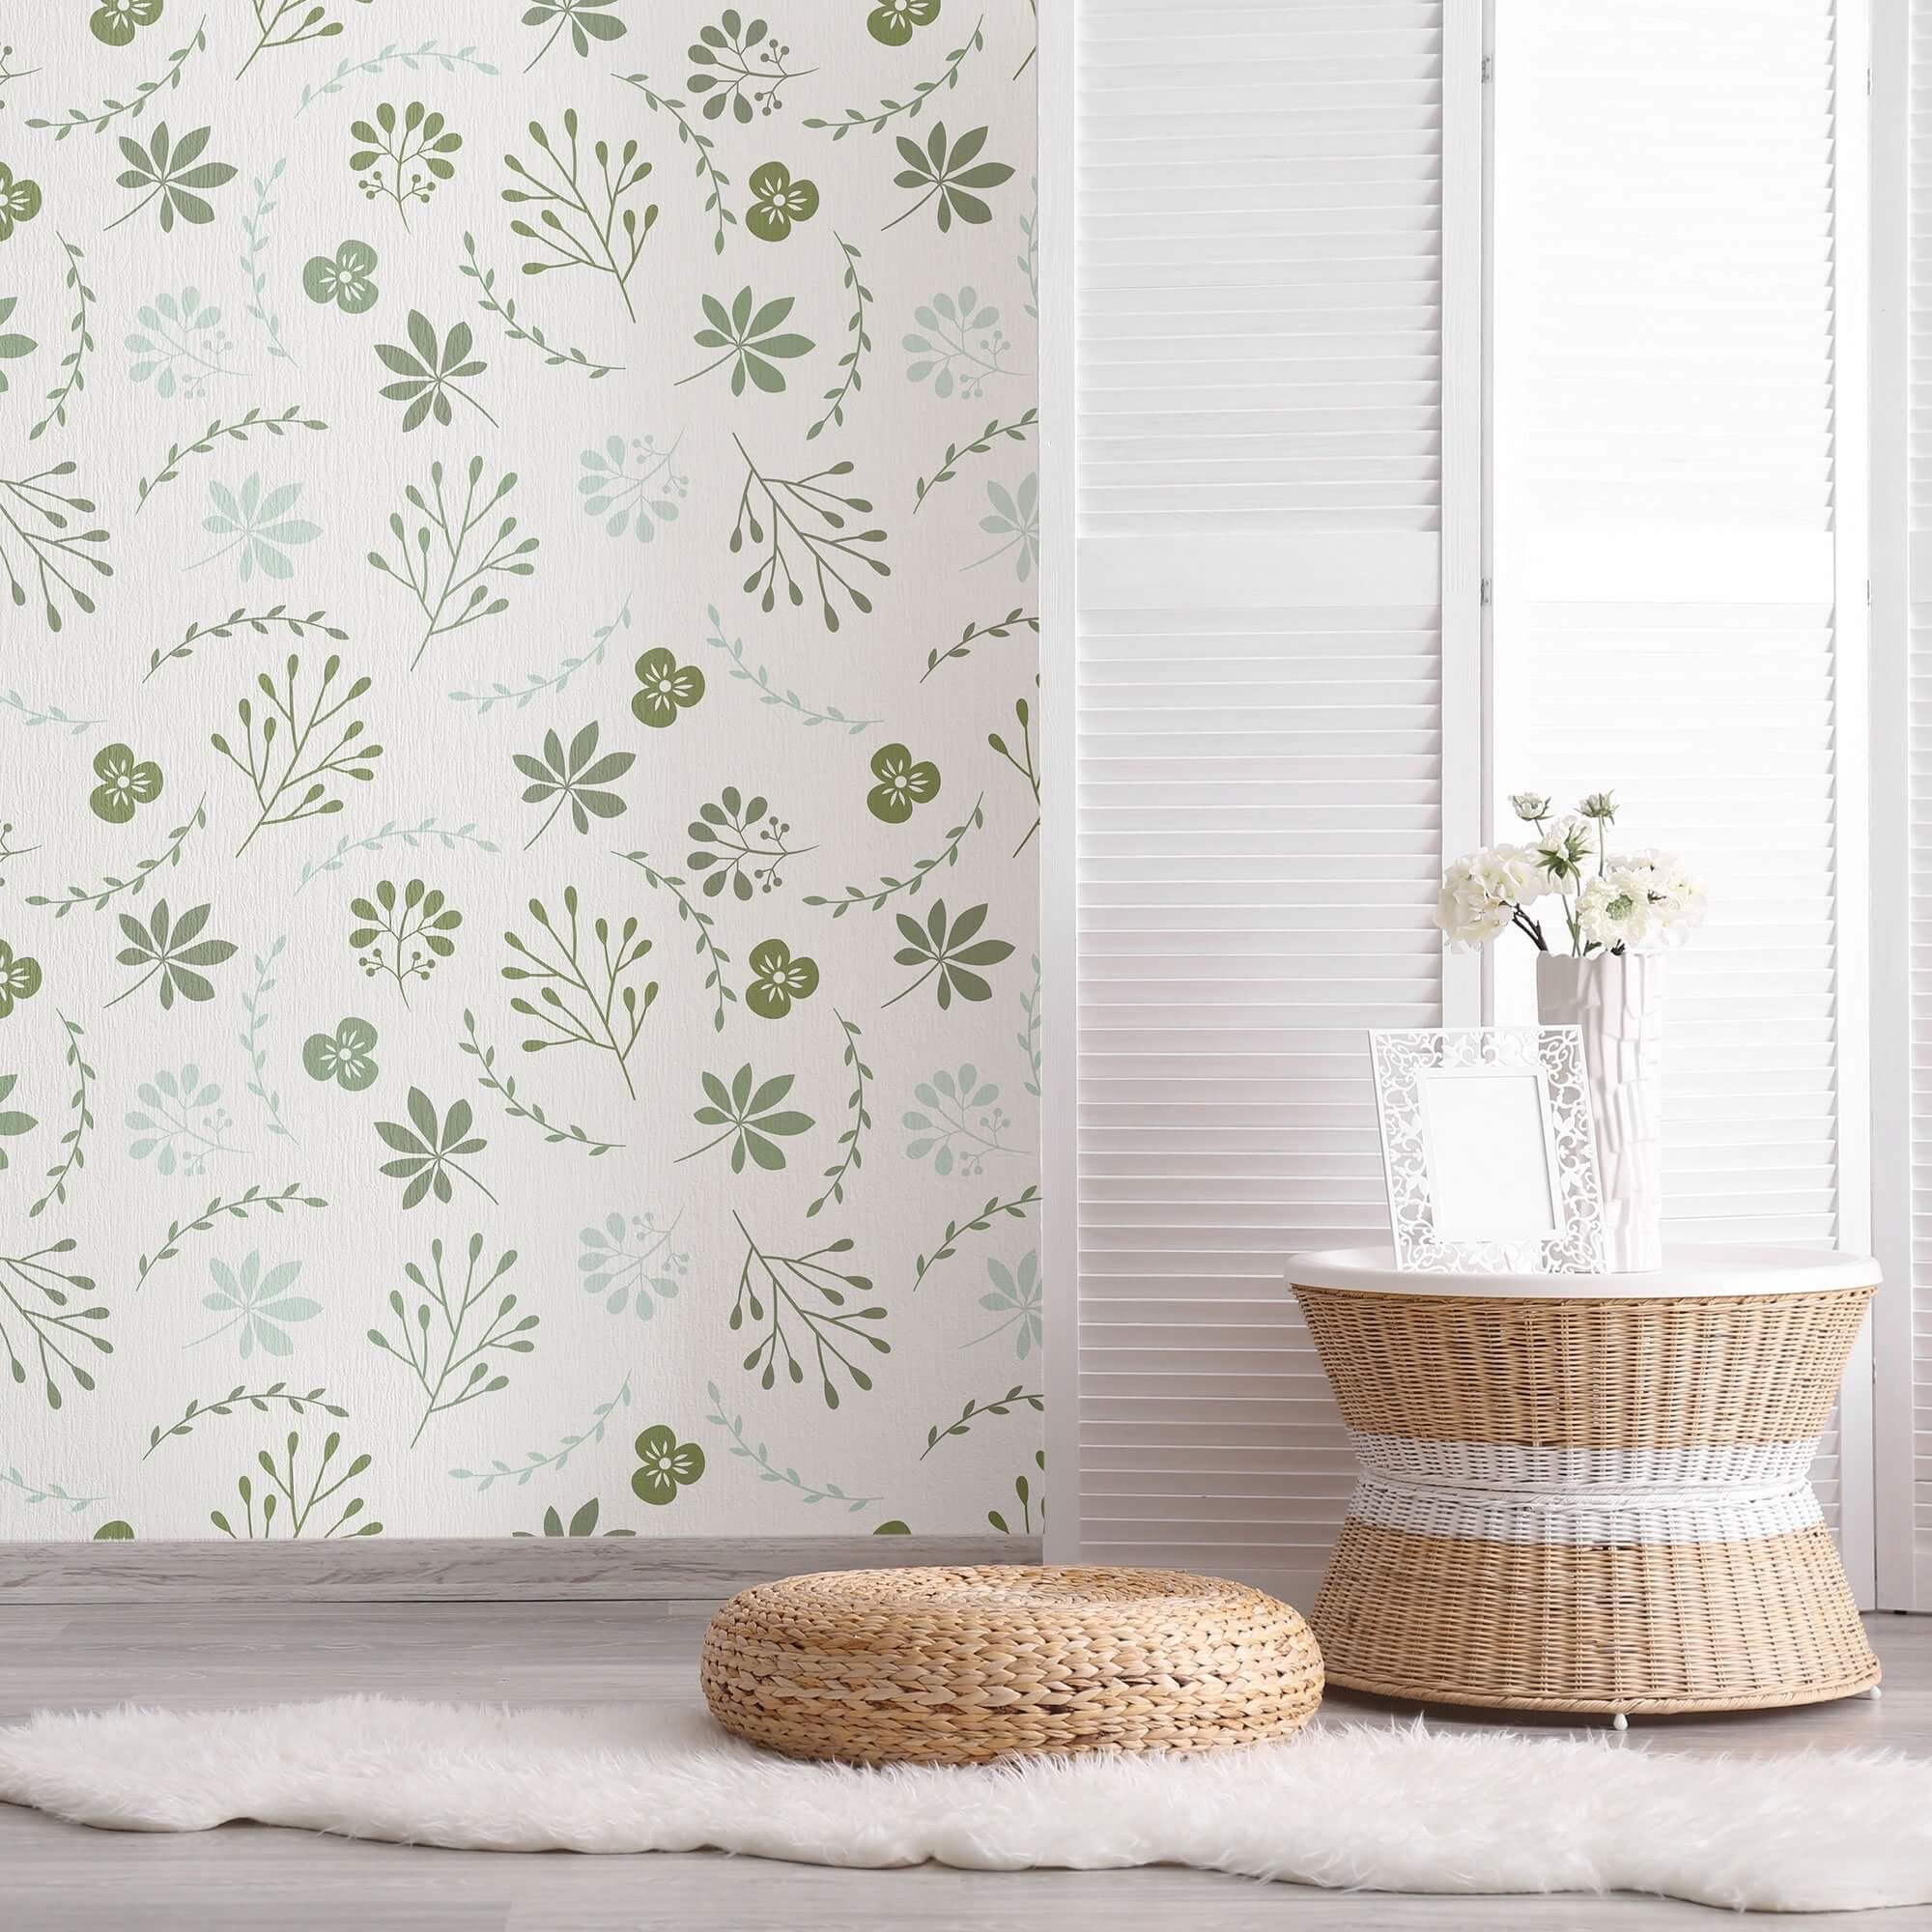 NextWall Pink and Kelly Green Garden Block Floral Vinyl Peel and Stick  Wallpaper Roll 3075 sq ft NW45301  The Home Depot